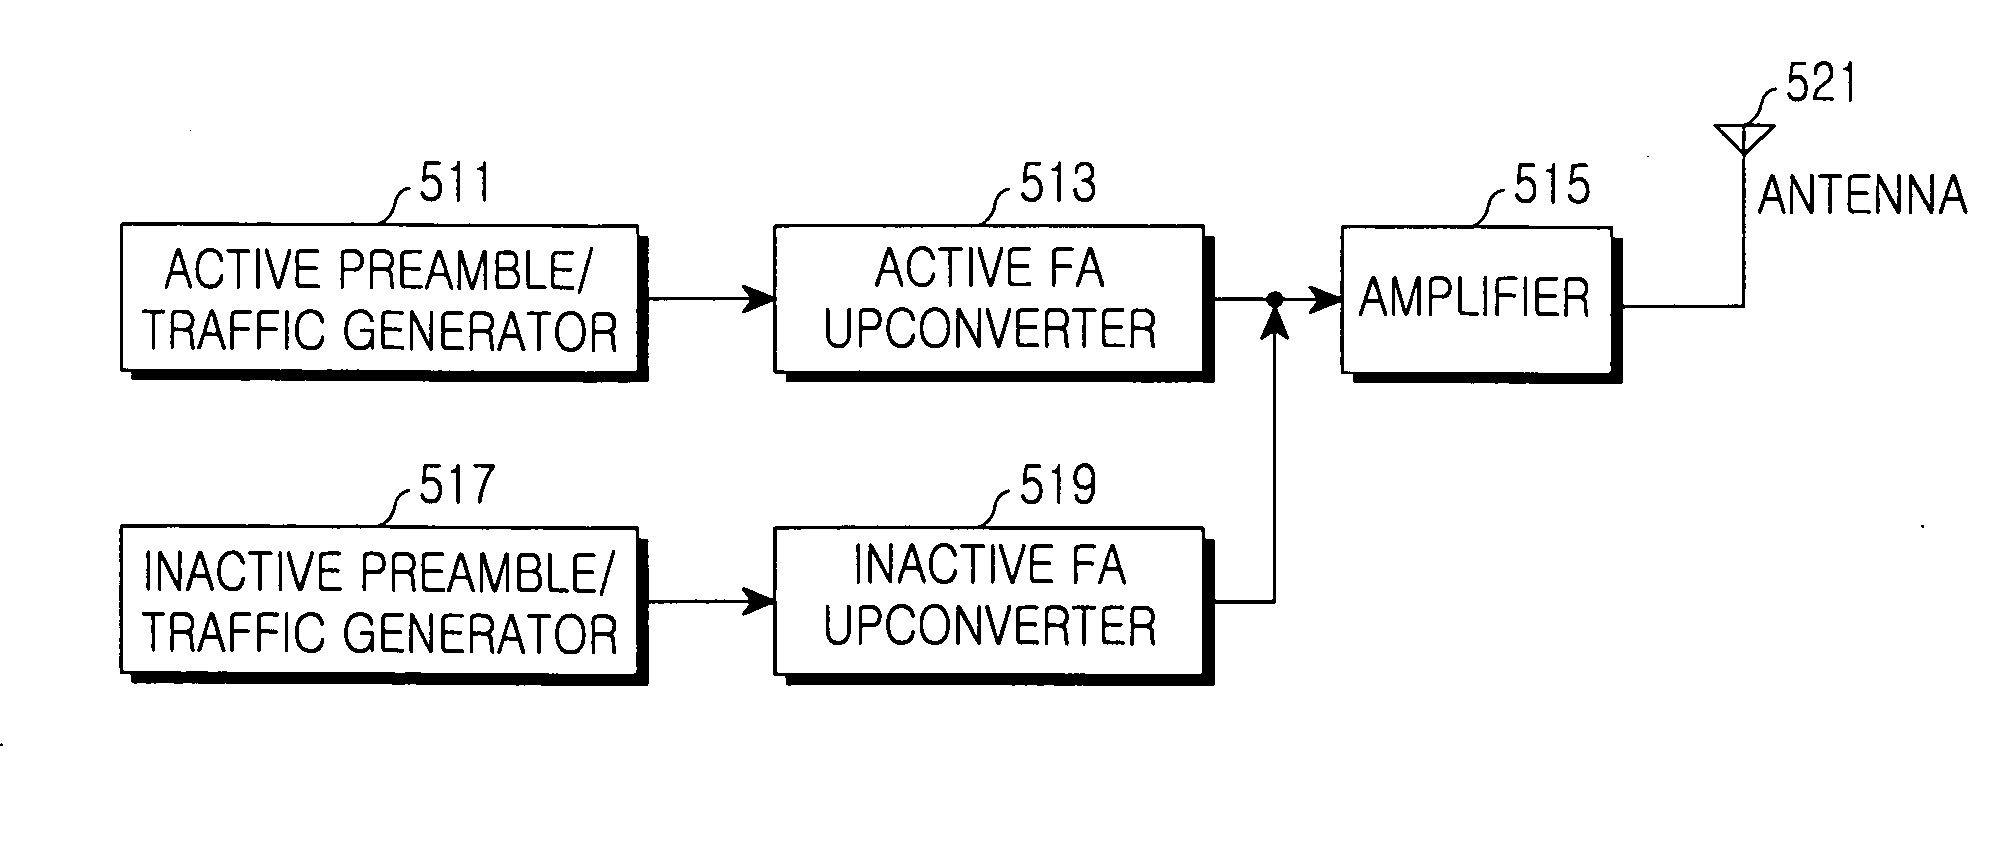 System and method for performing handover between frequency assignments in a communication system